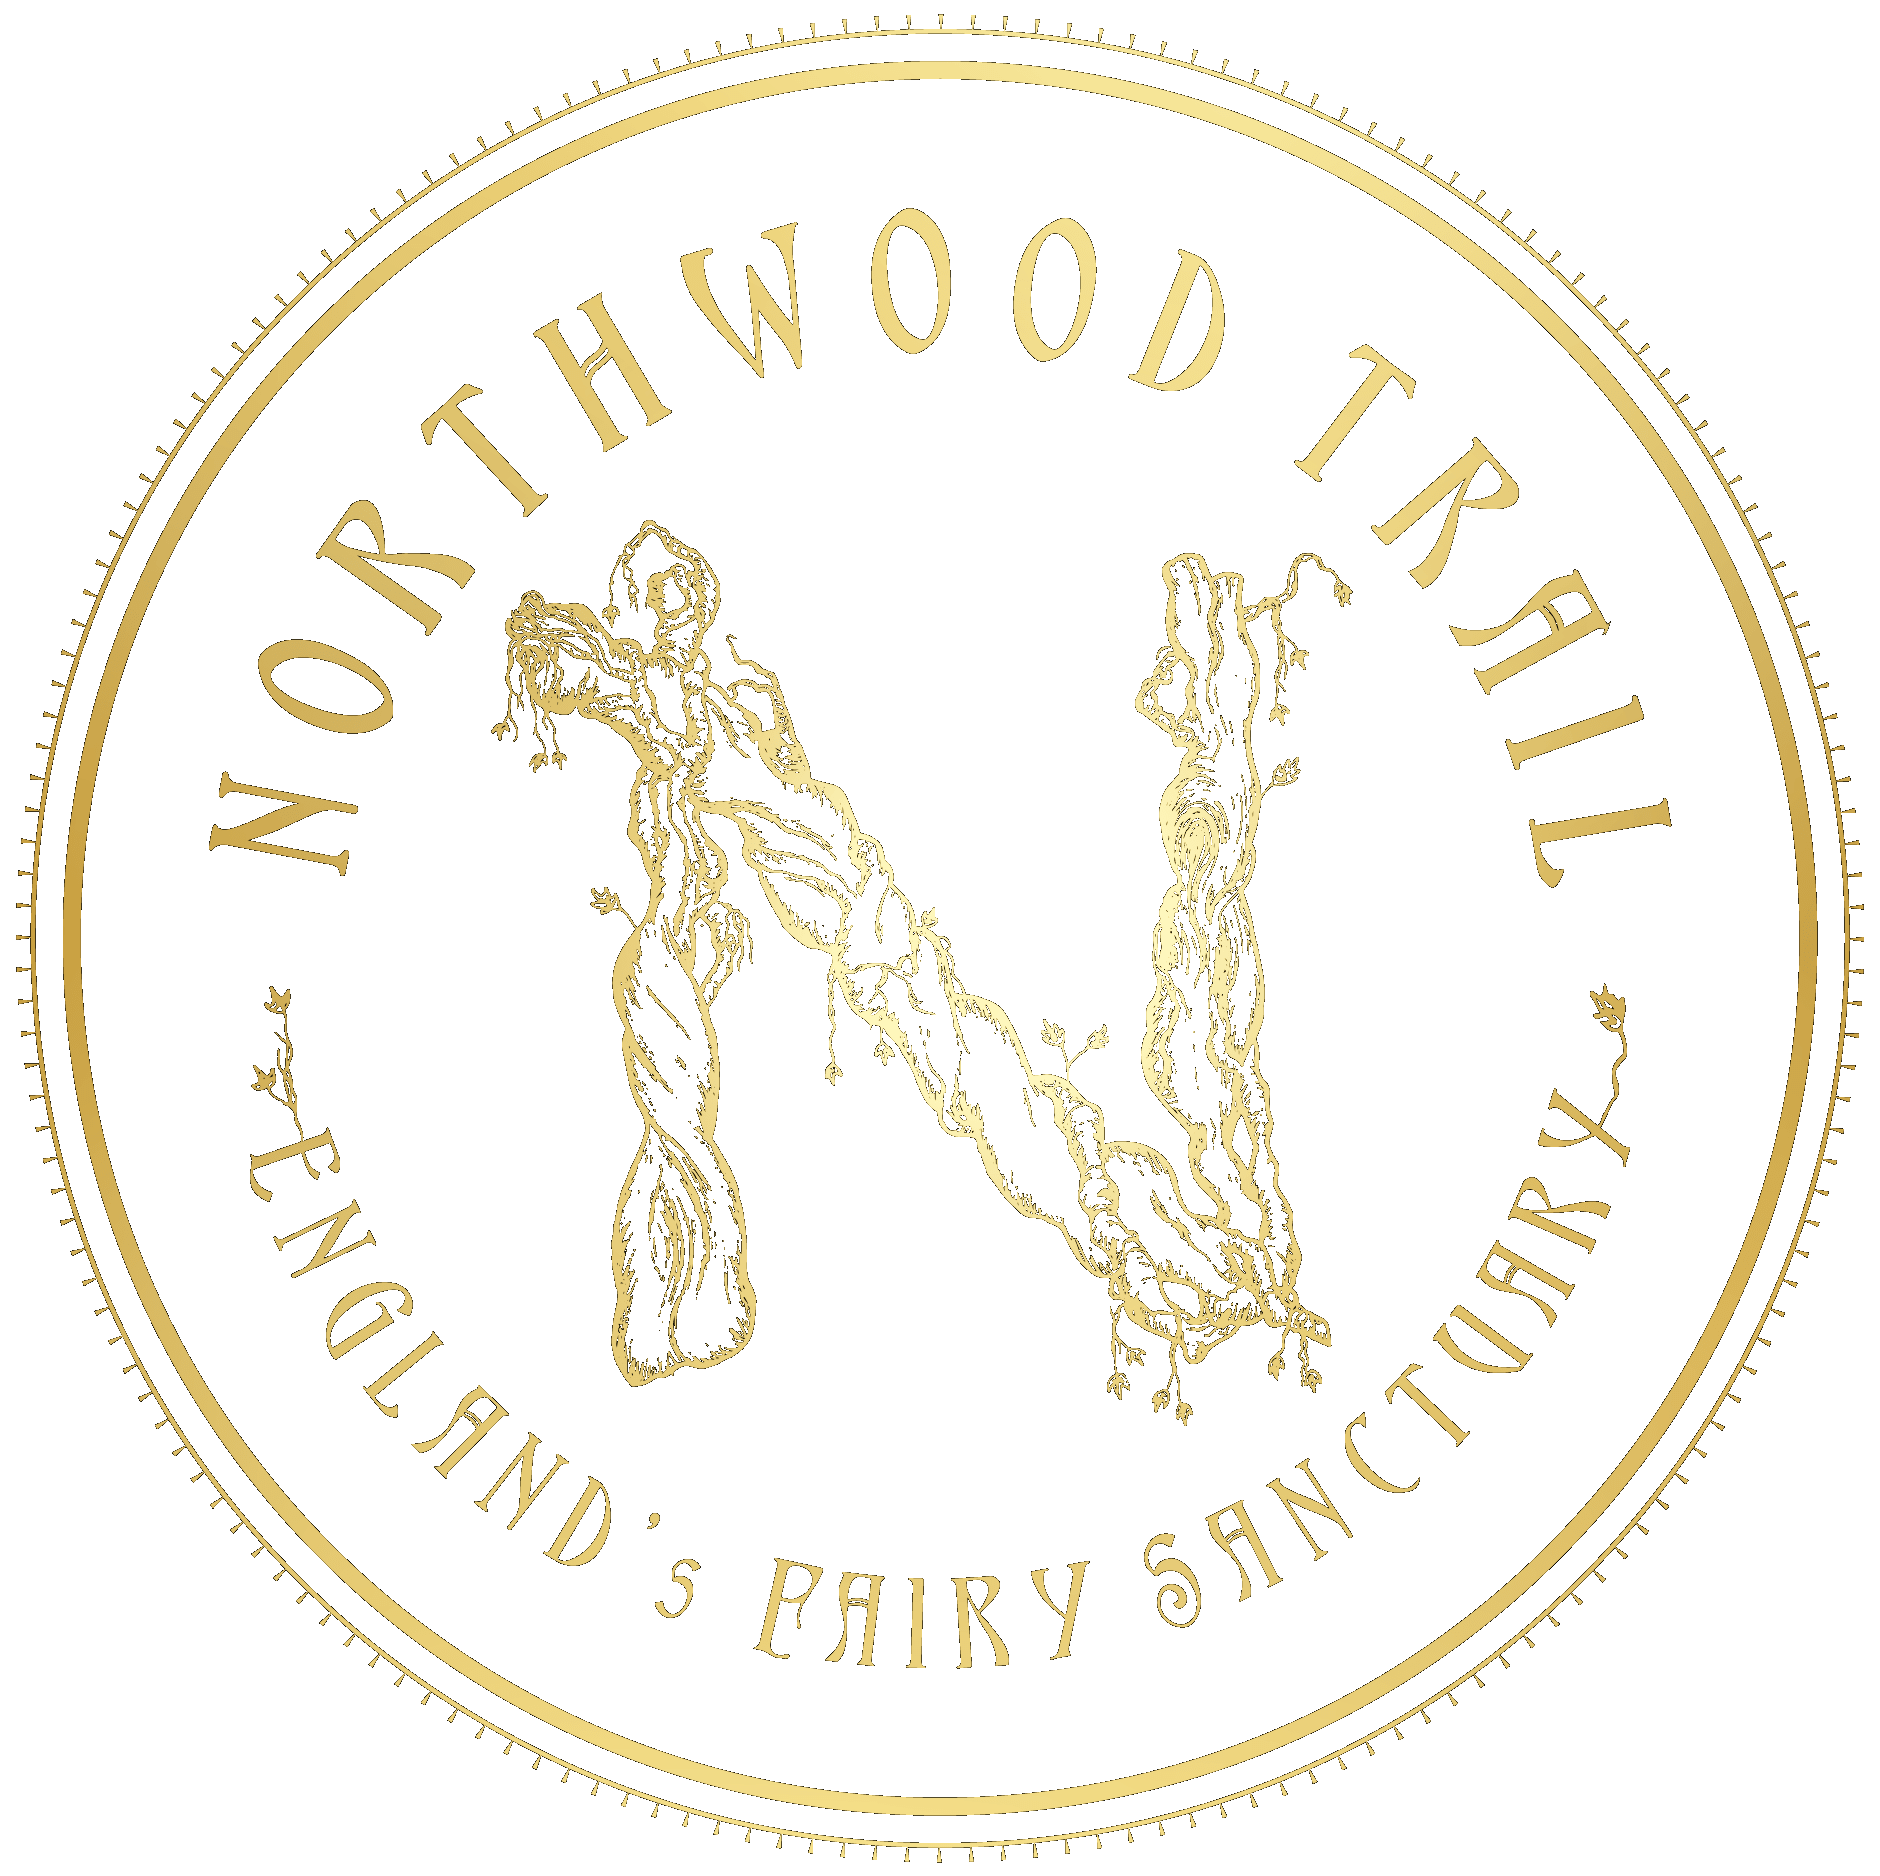 Opening times, Woodland attractions York, Northwood trail